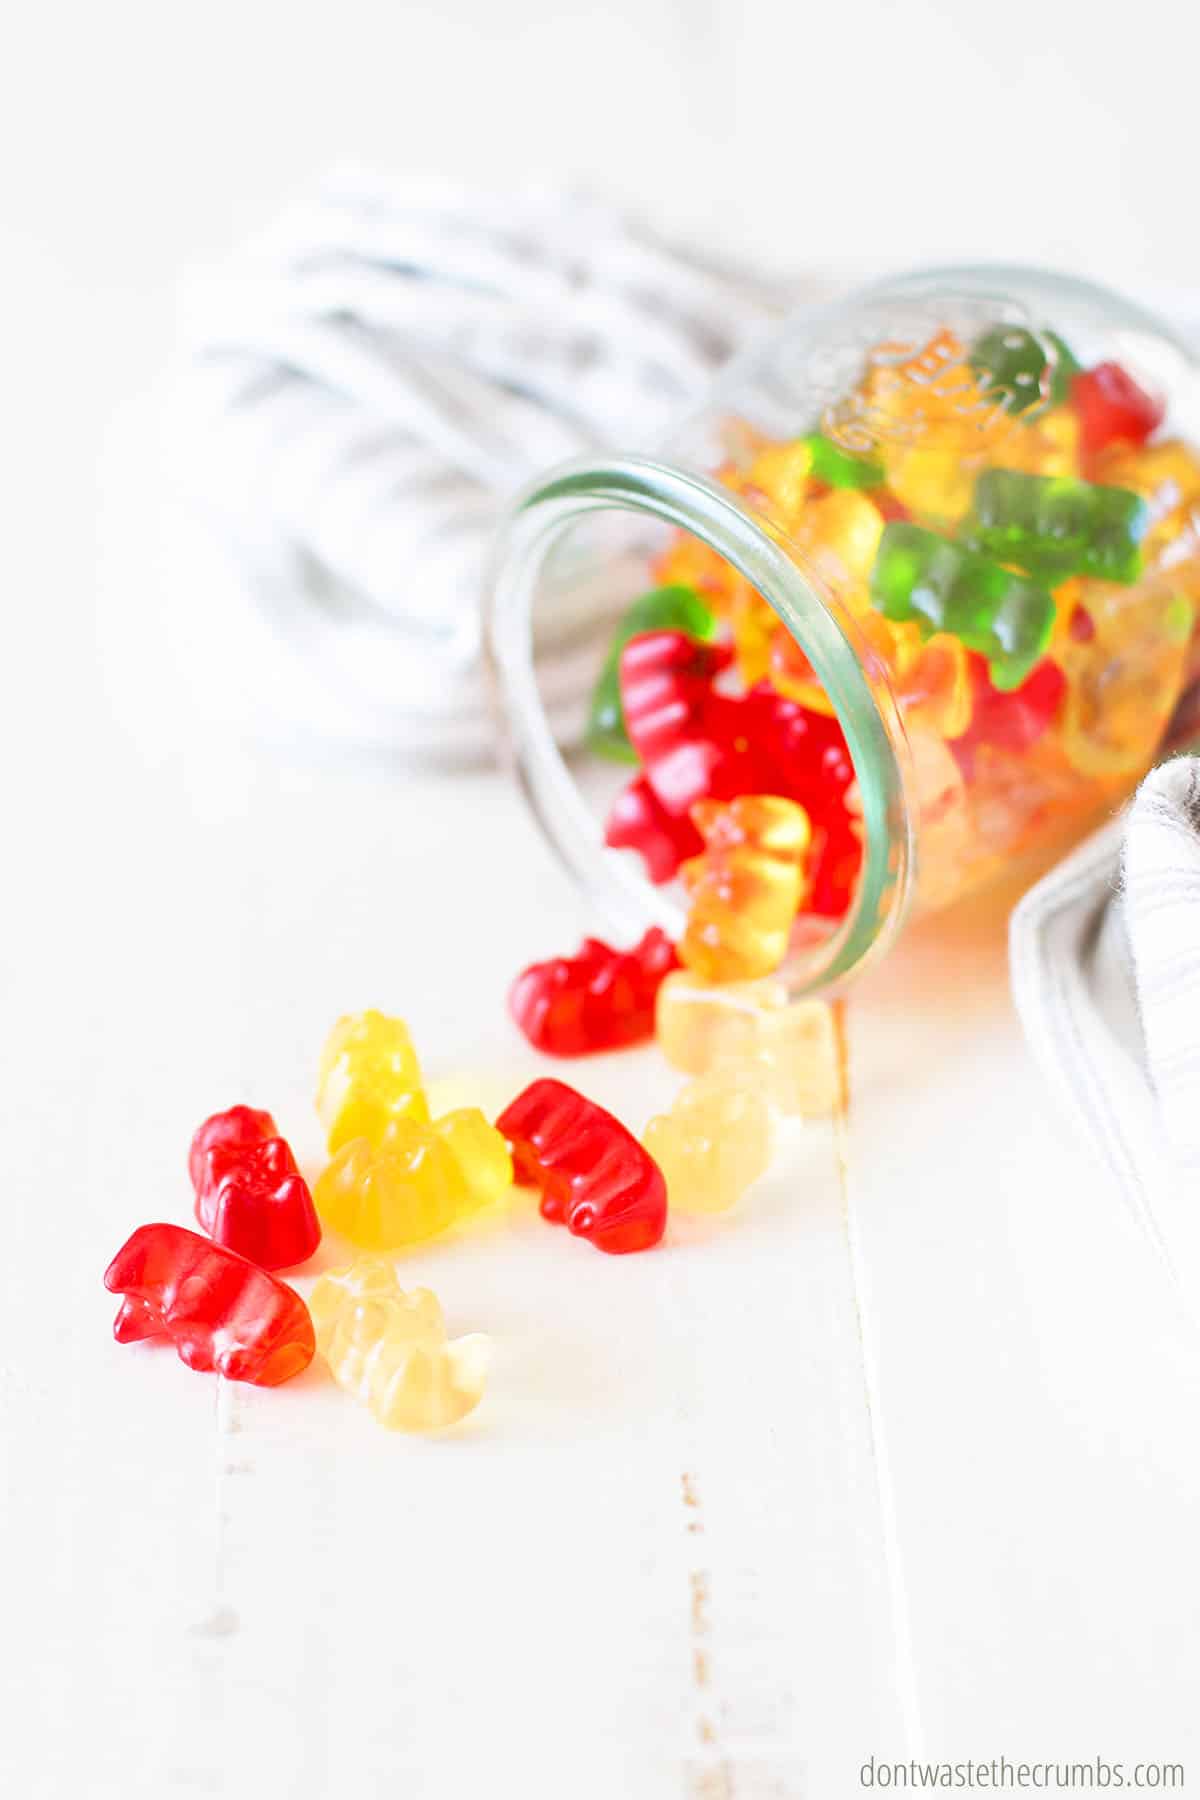 Small glass jar tipped over with gummy bears spilling out onto a counter